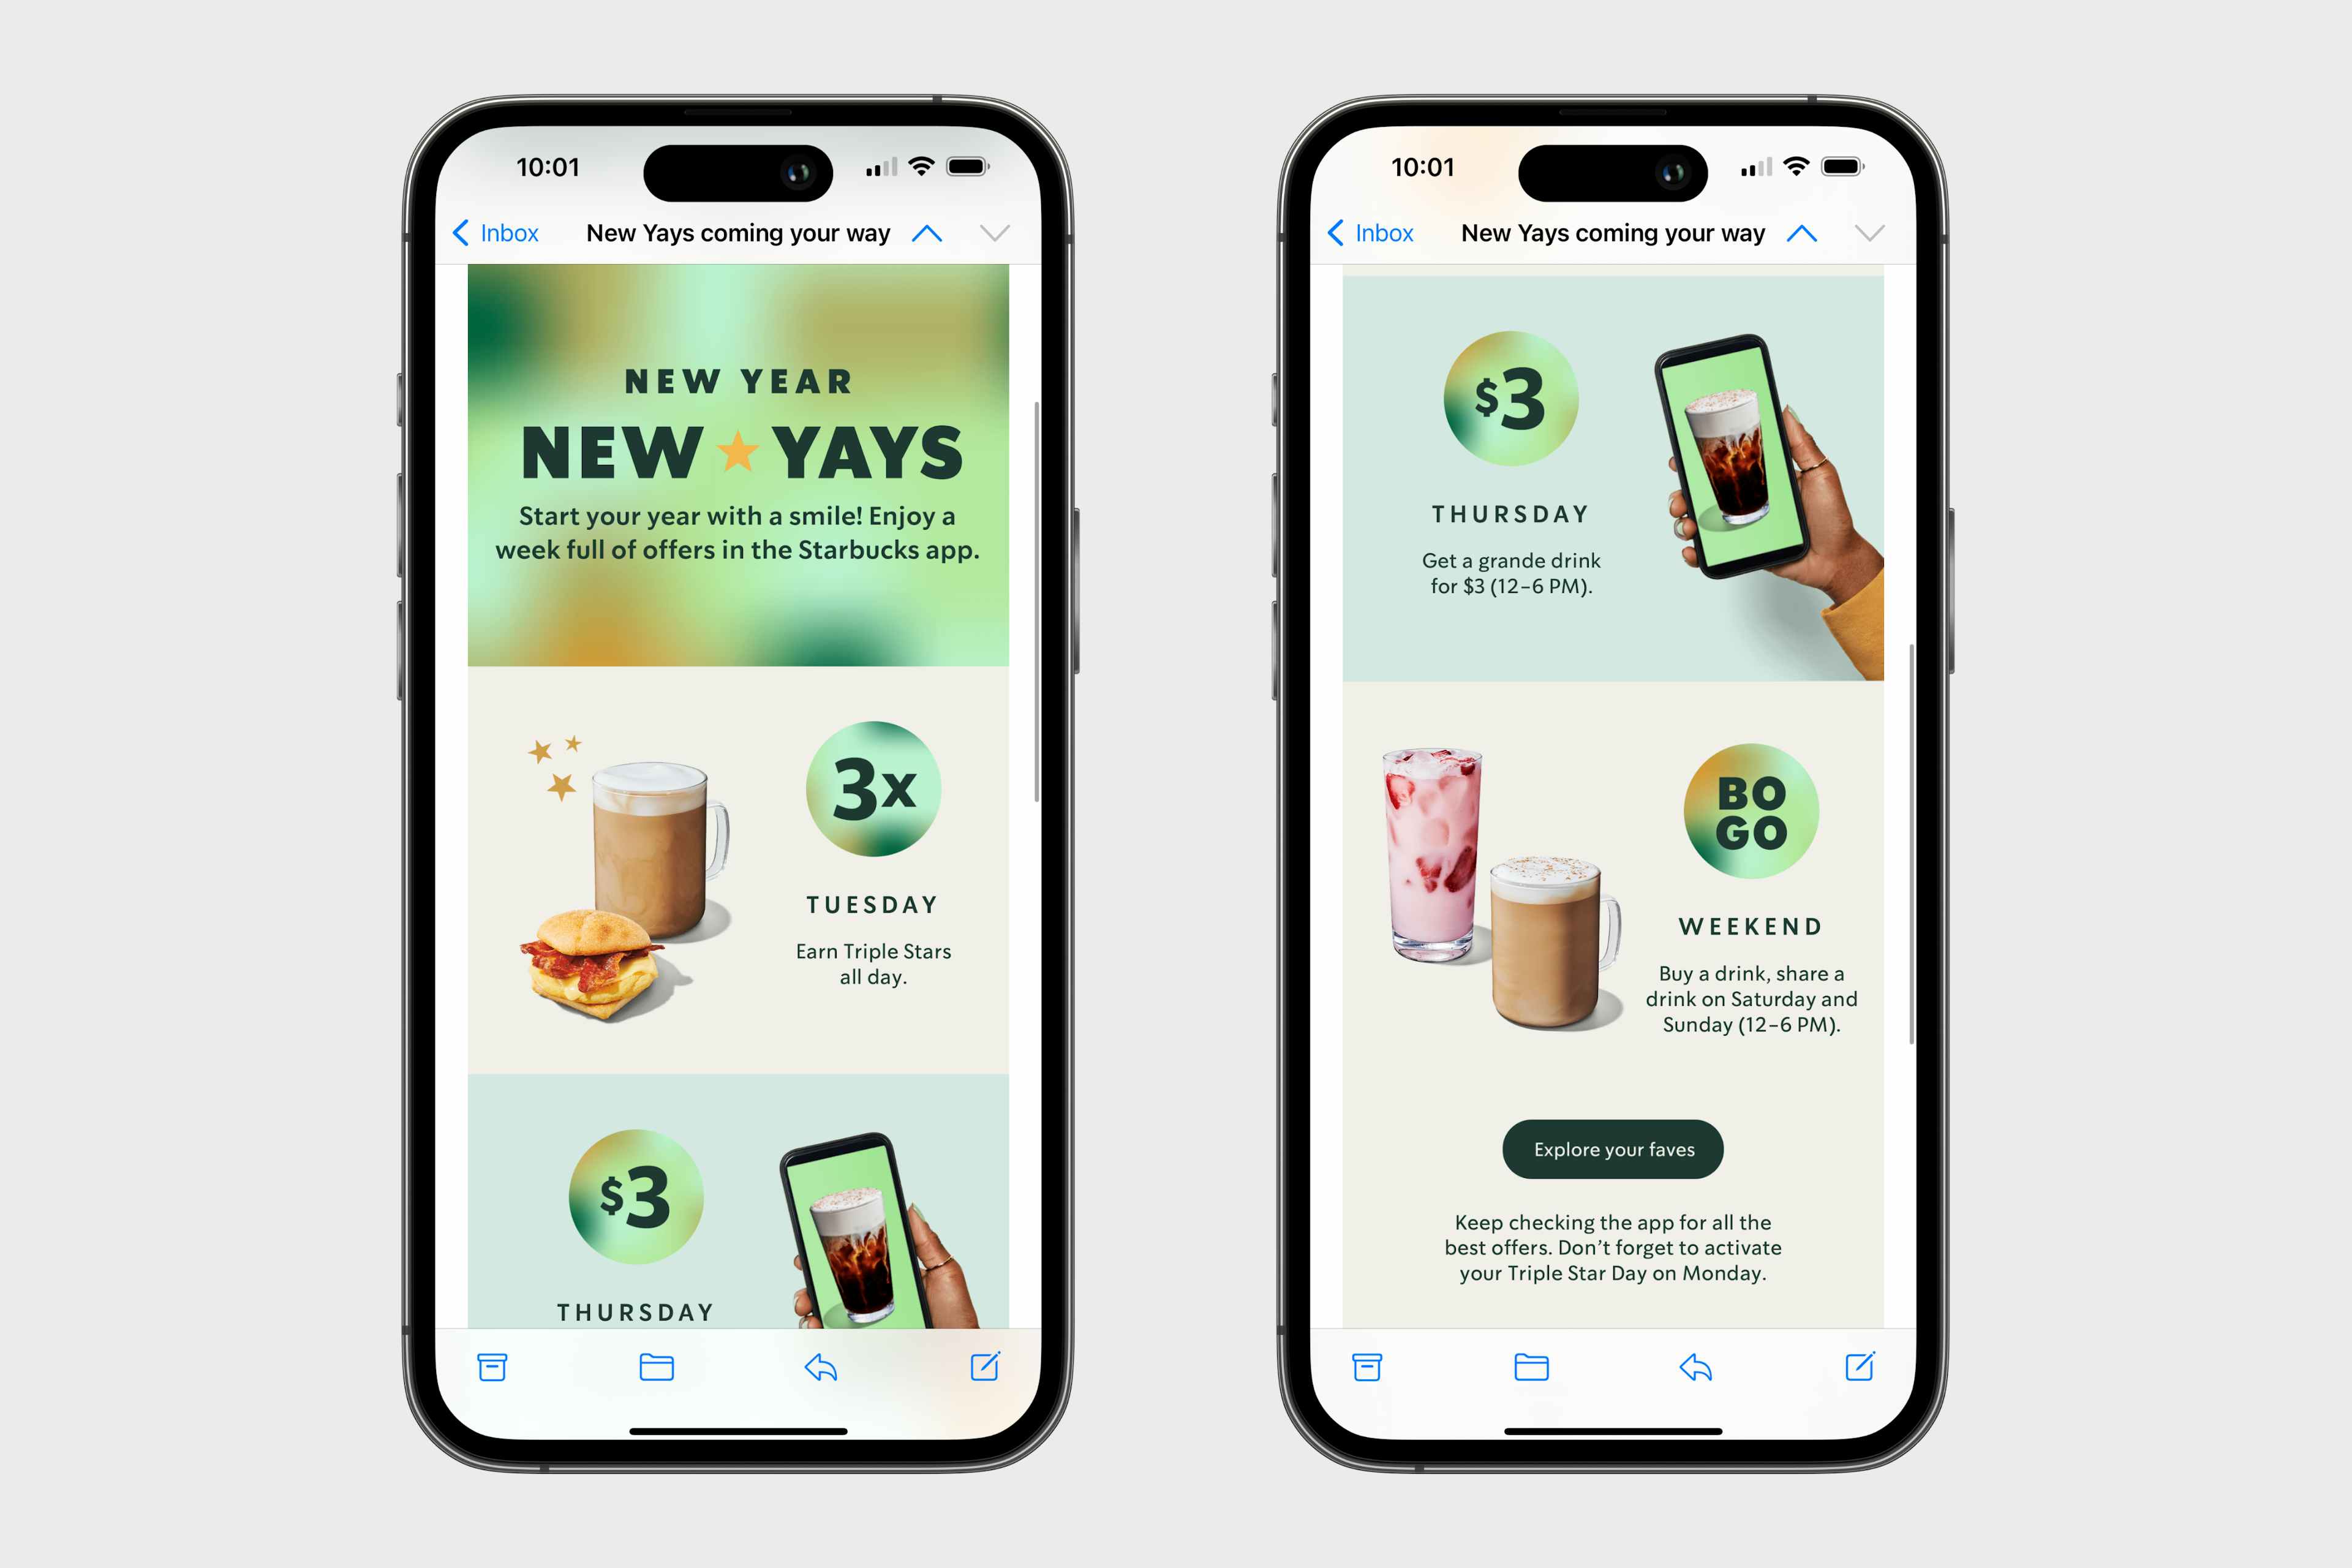 starbucks offers for the new year on phone screens 